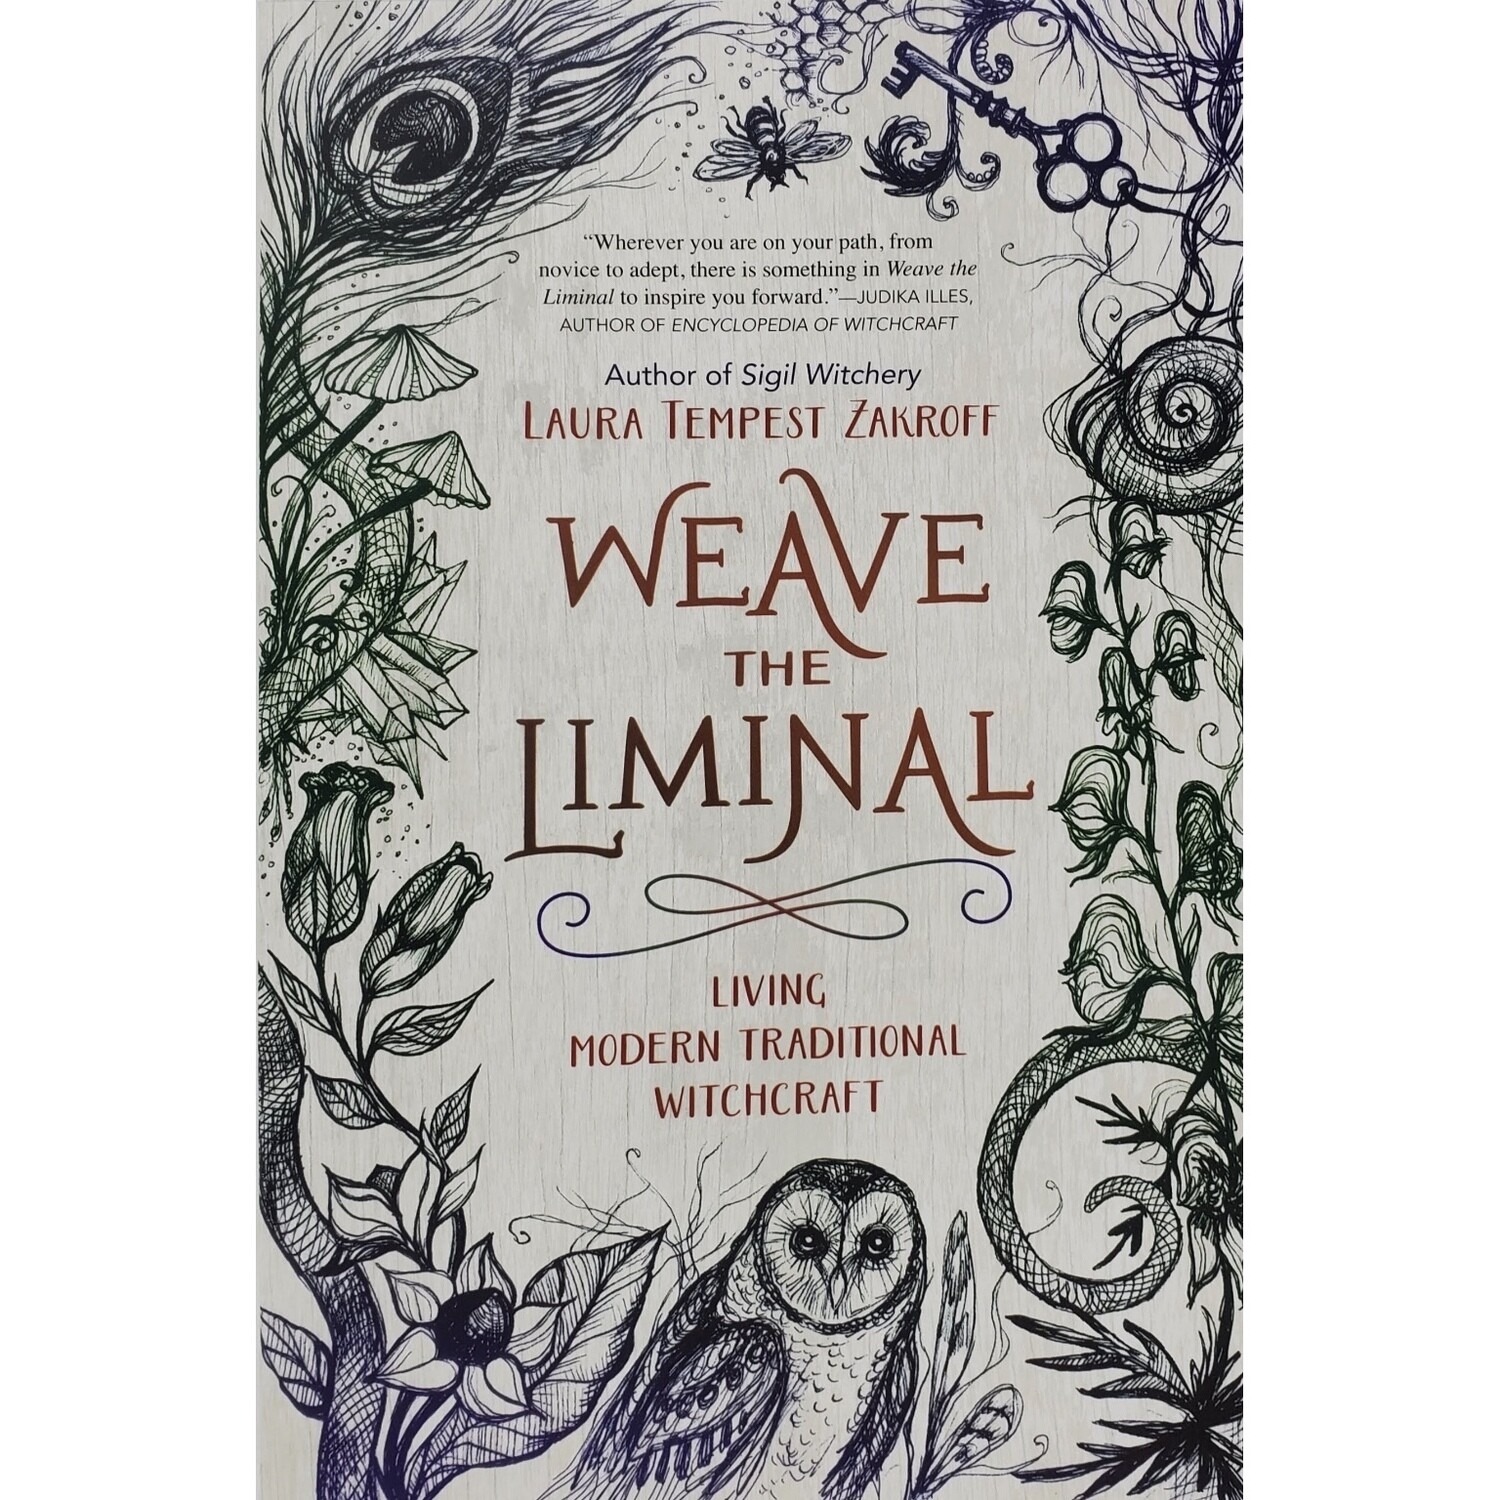 WEAVE THE LIMINAL